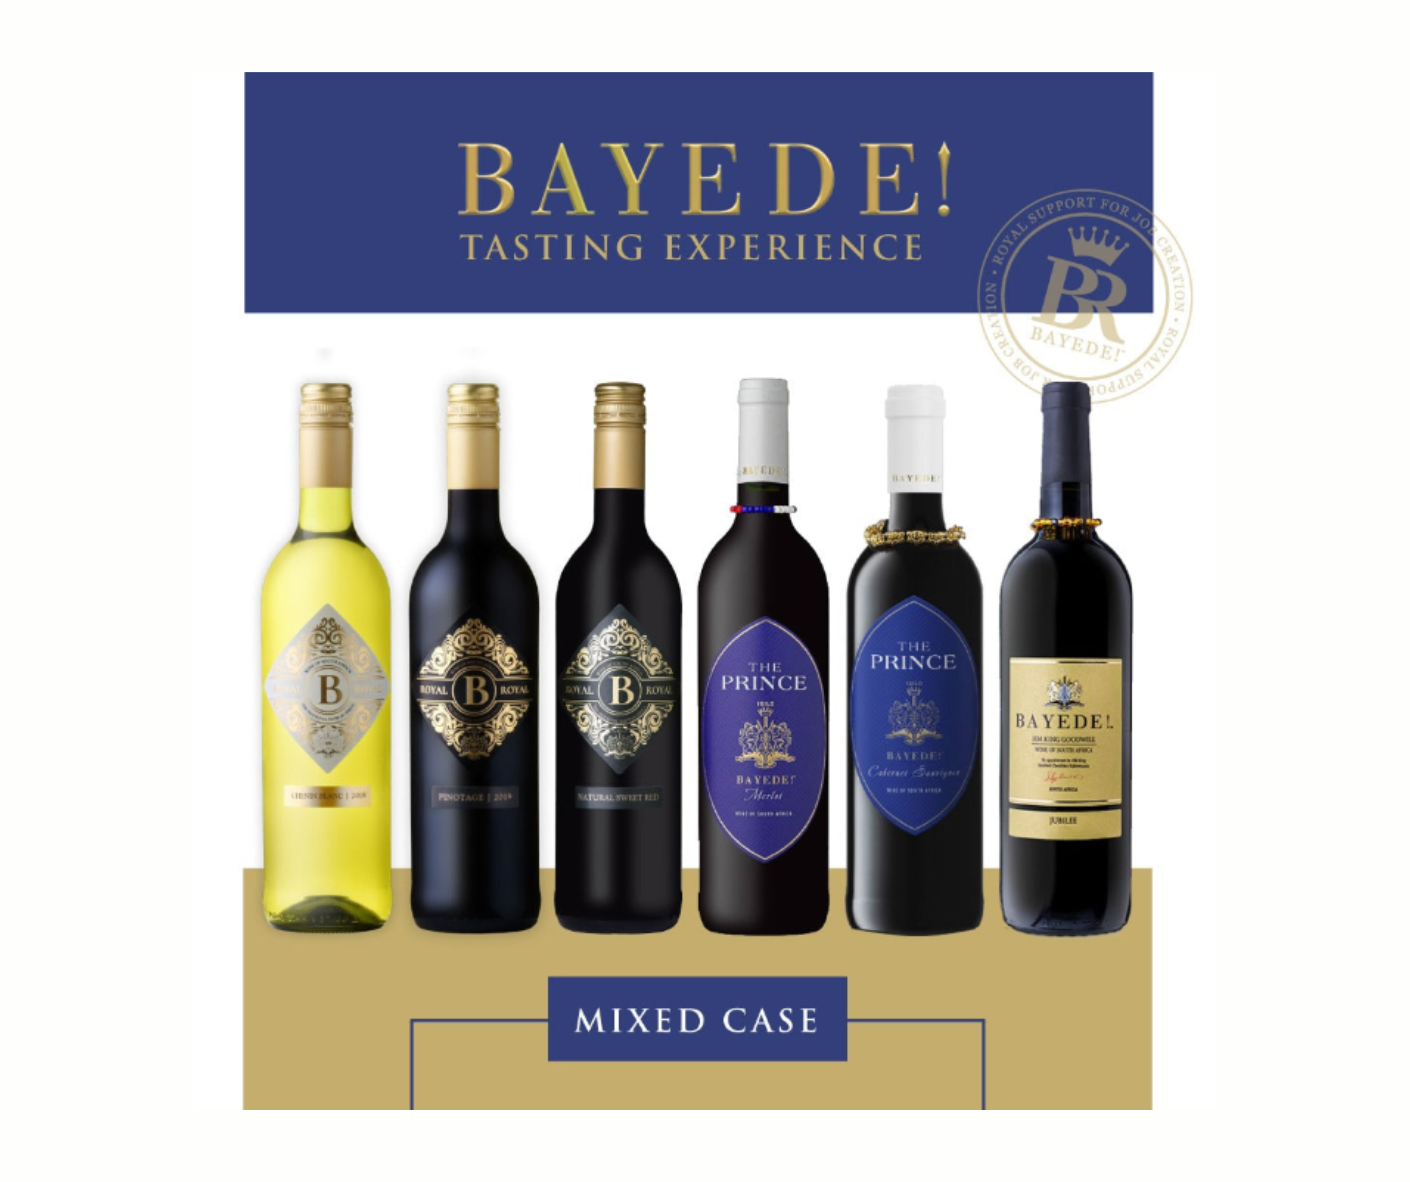 Bayede! Tasting Experience mixed case